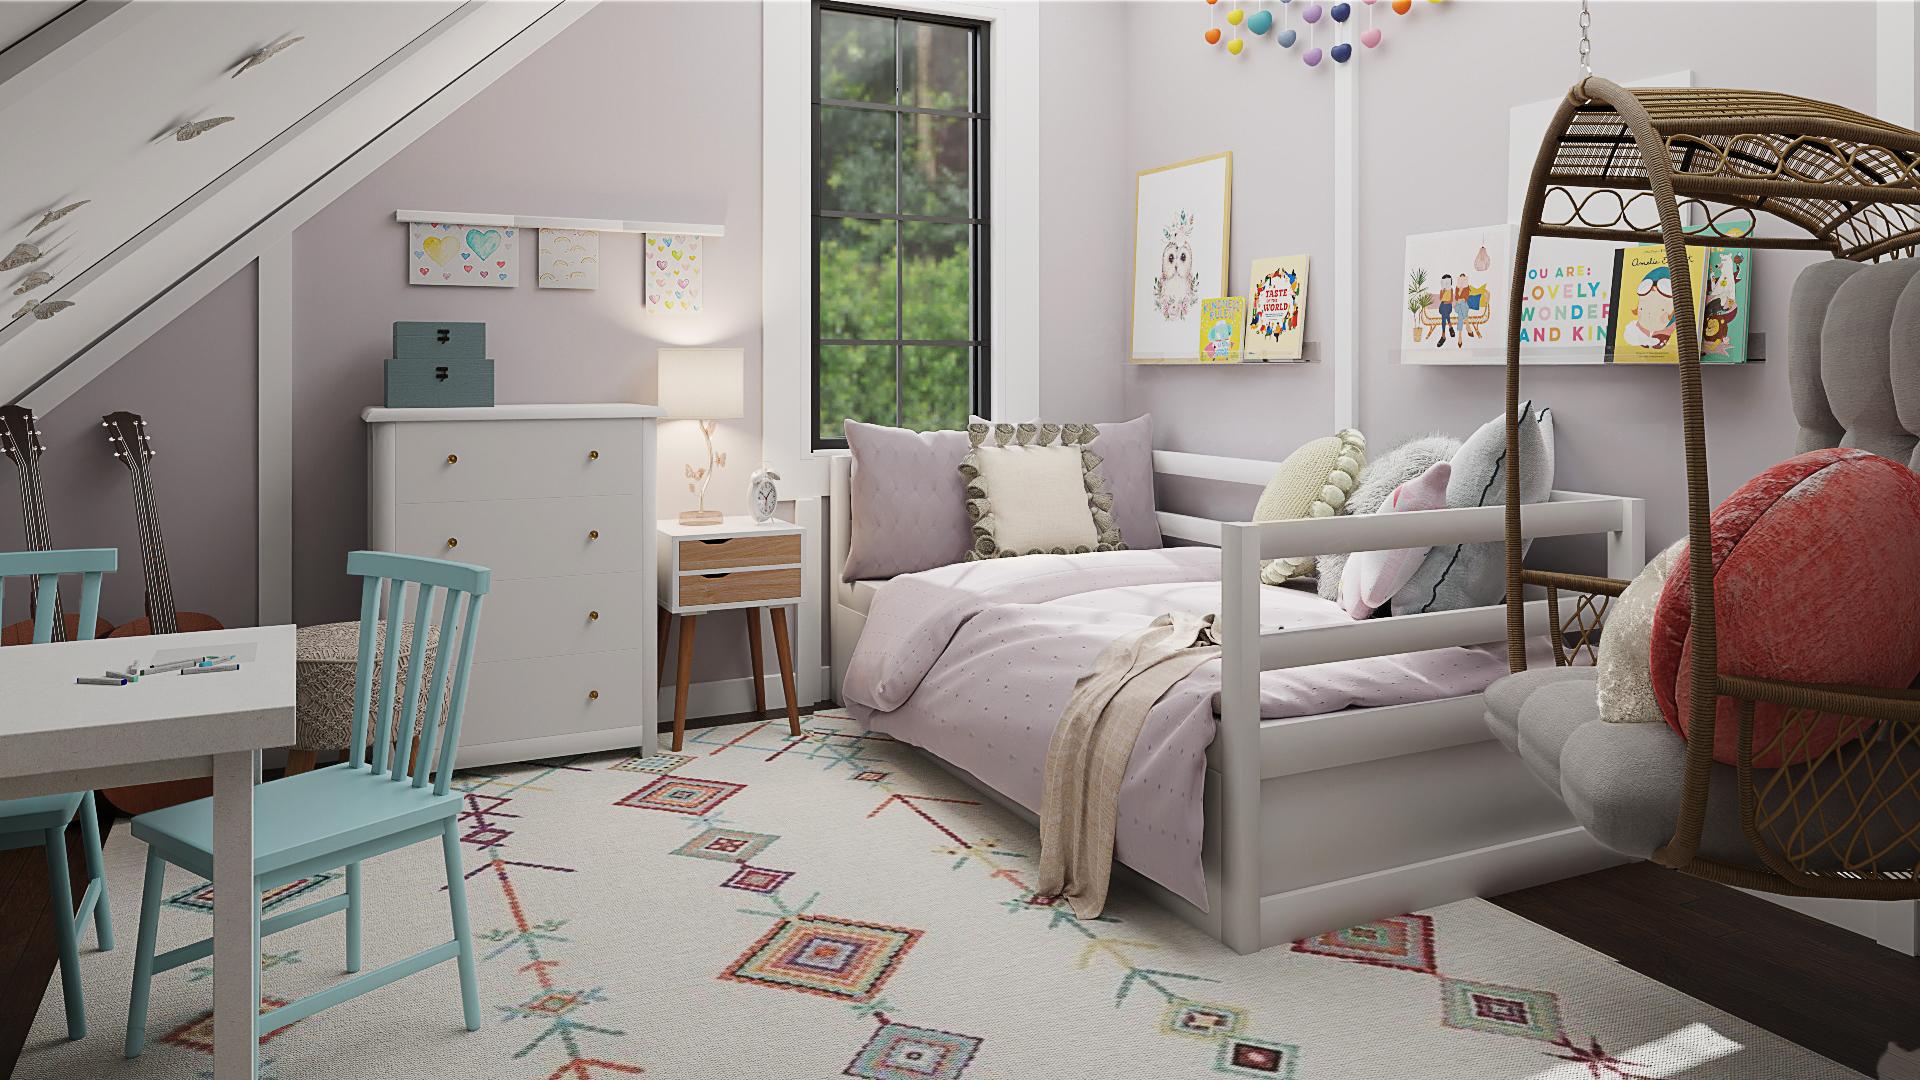 An Eclectic Kids Bedroom With Cheerful Moods